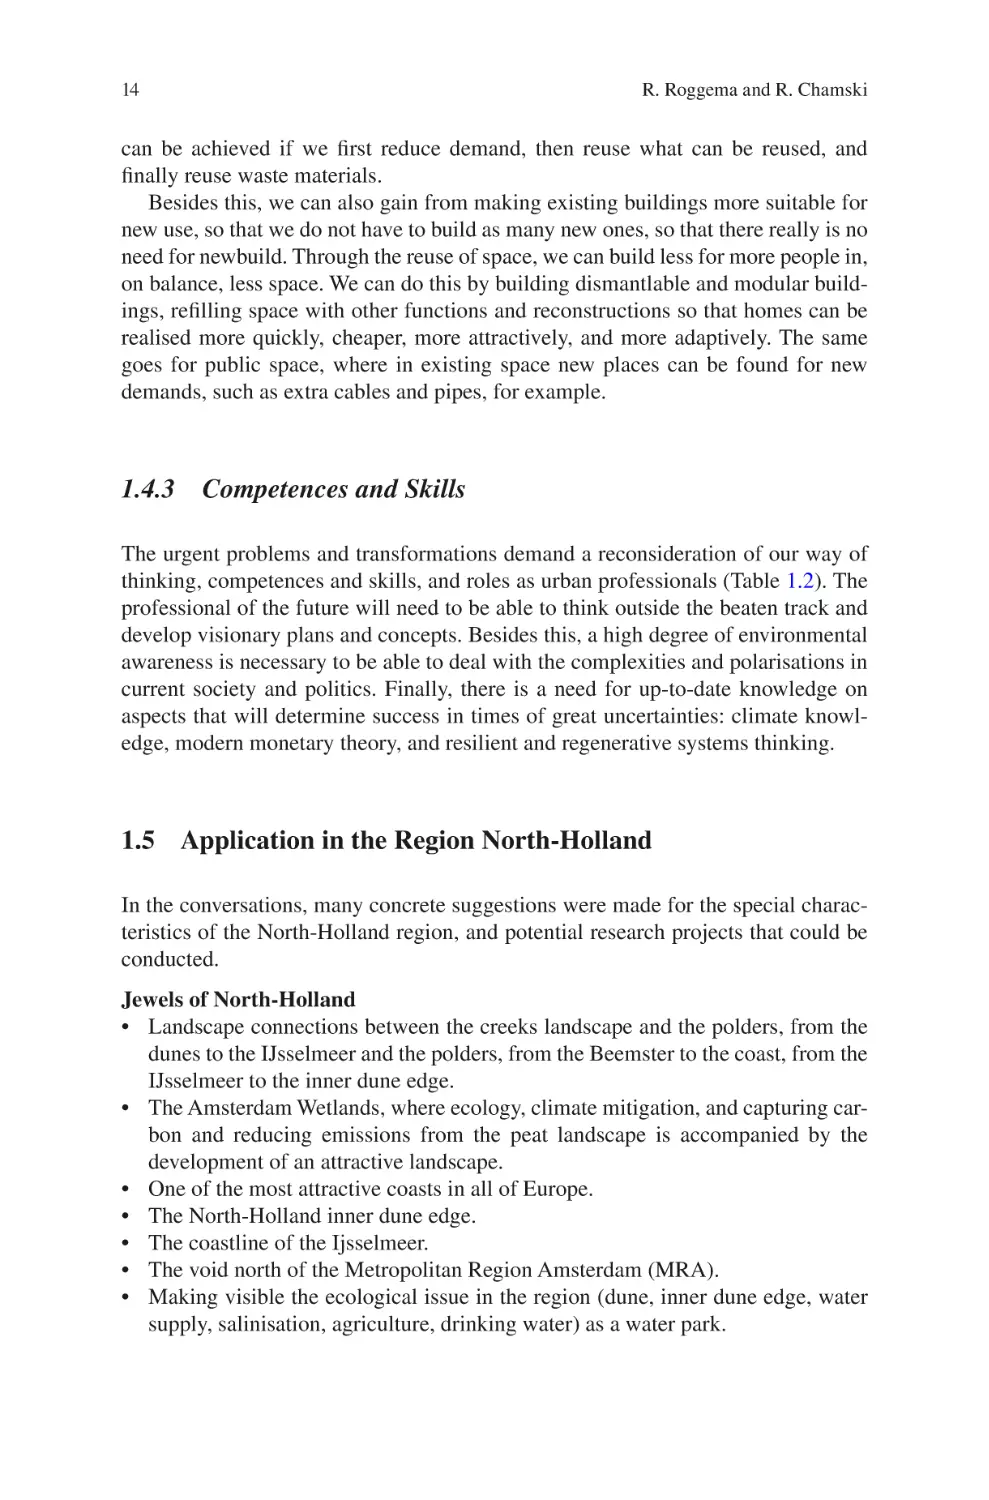 1.4.3 Competences and Skills
1.5 Application in the Region North-Holland